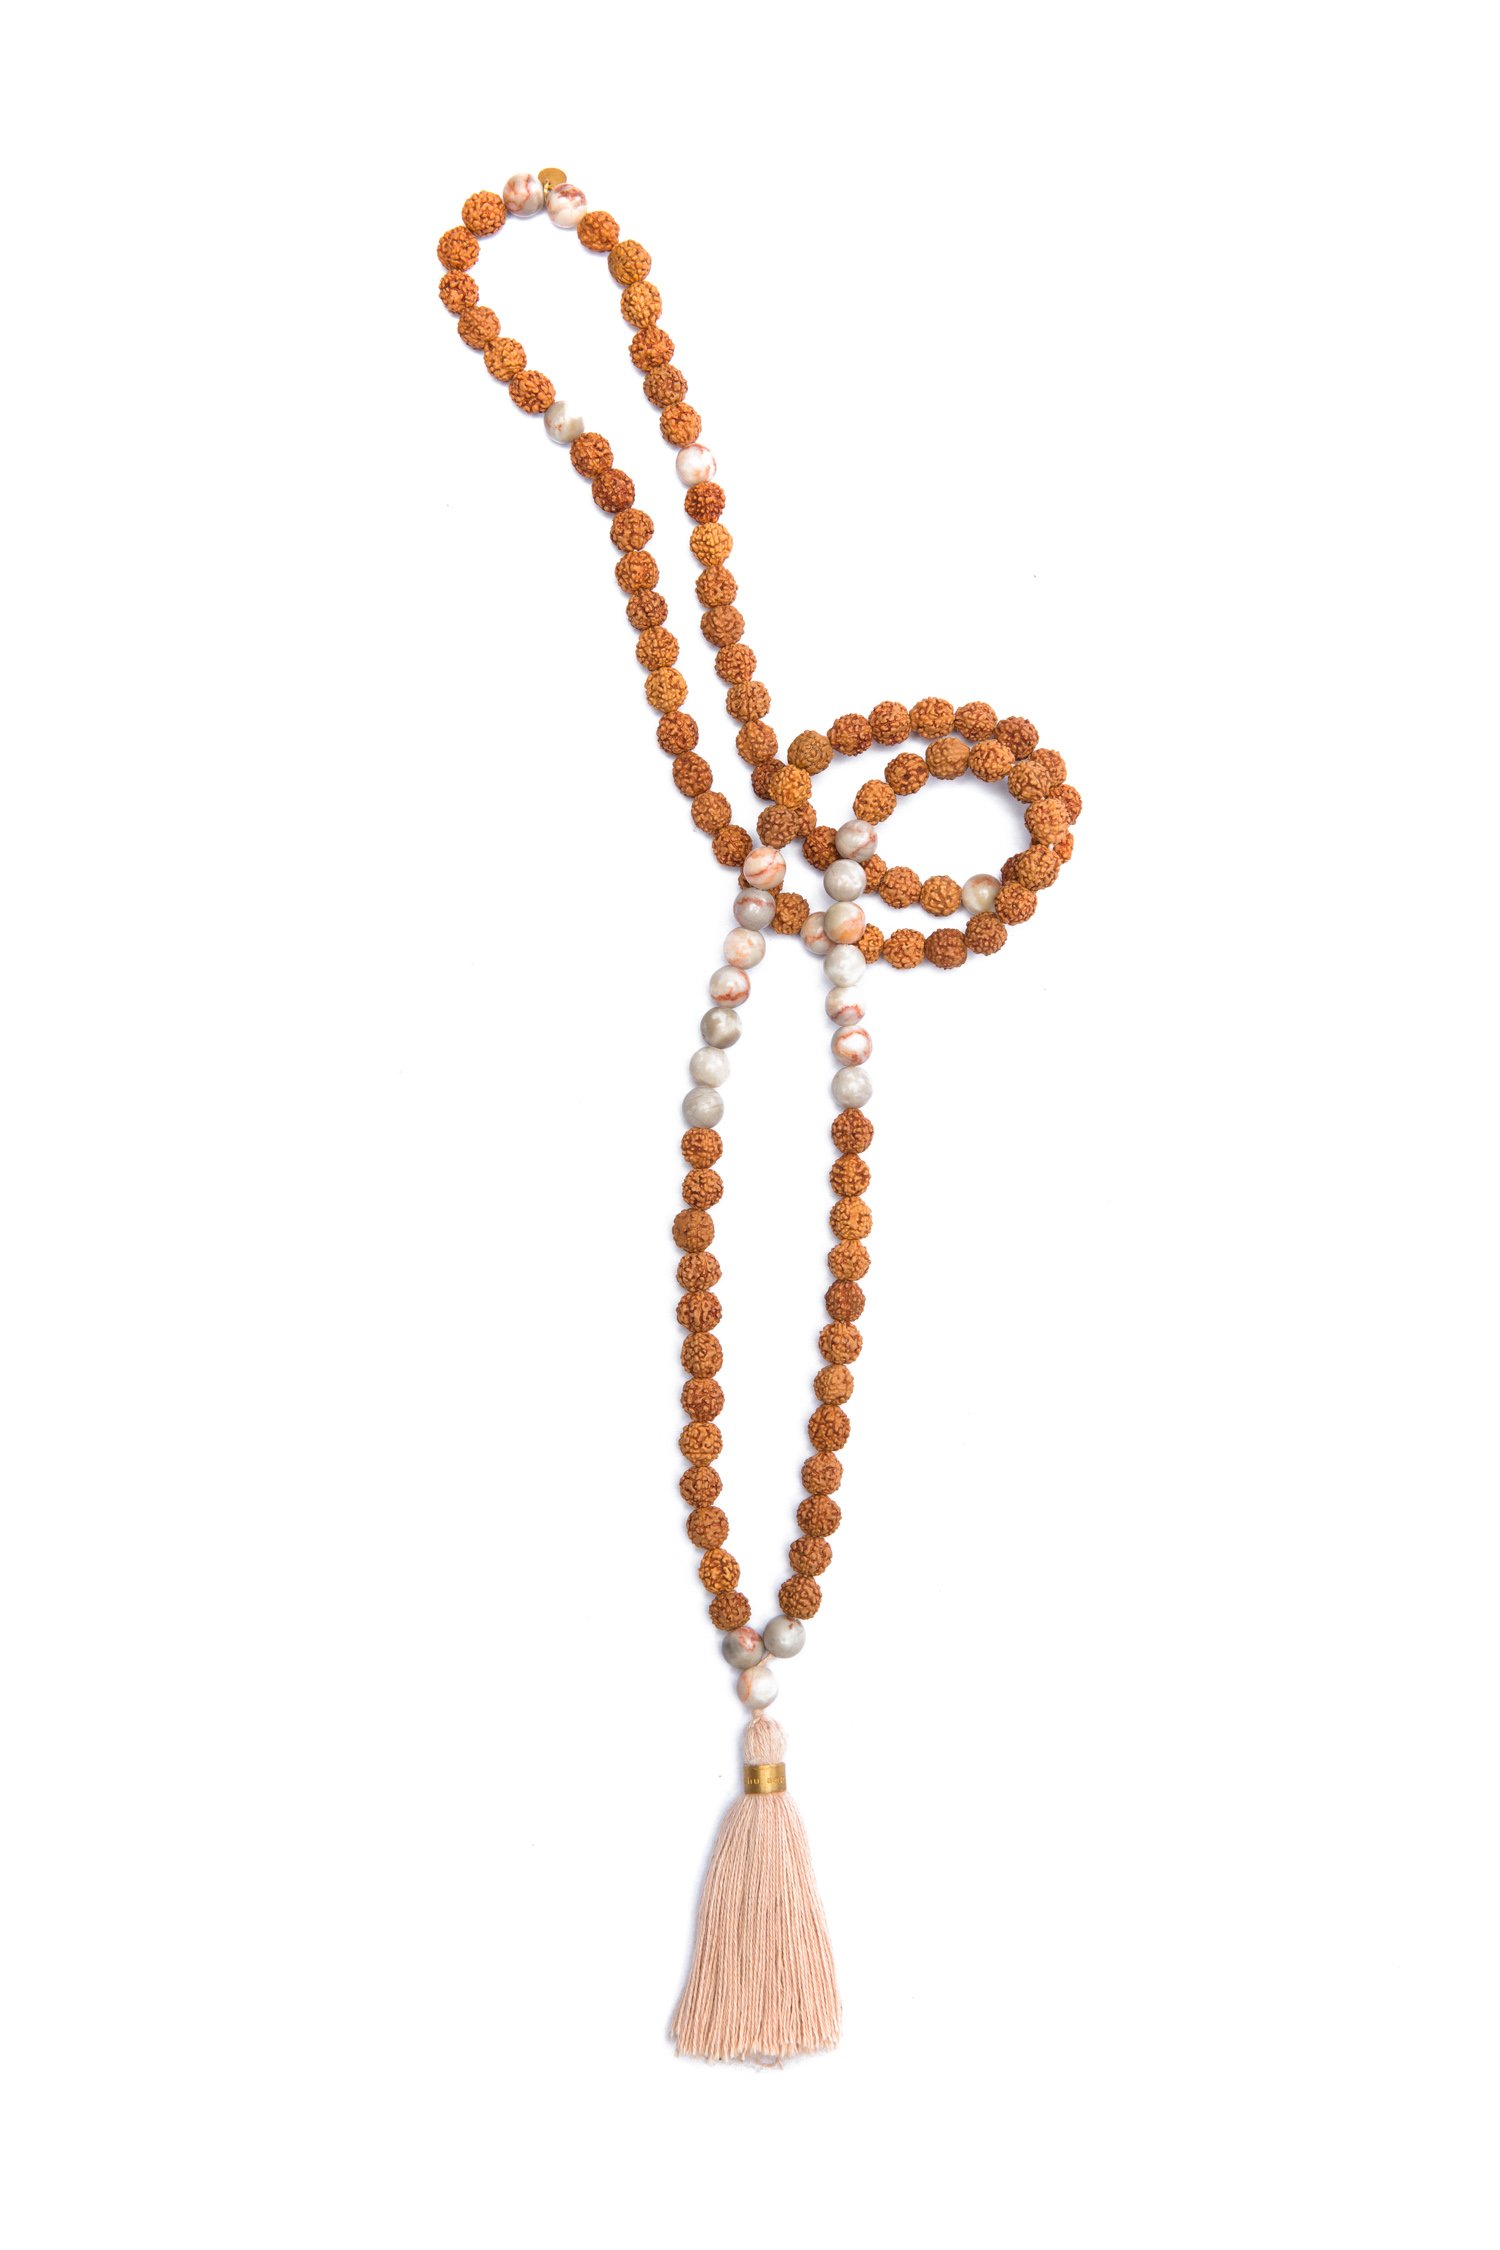 The Path of the Heart Mala